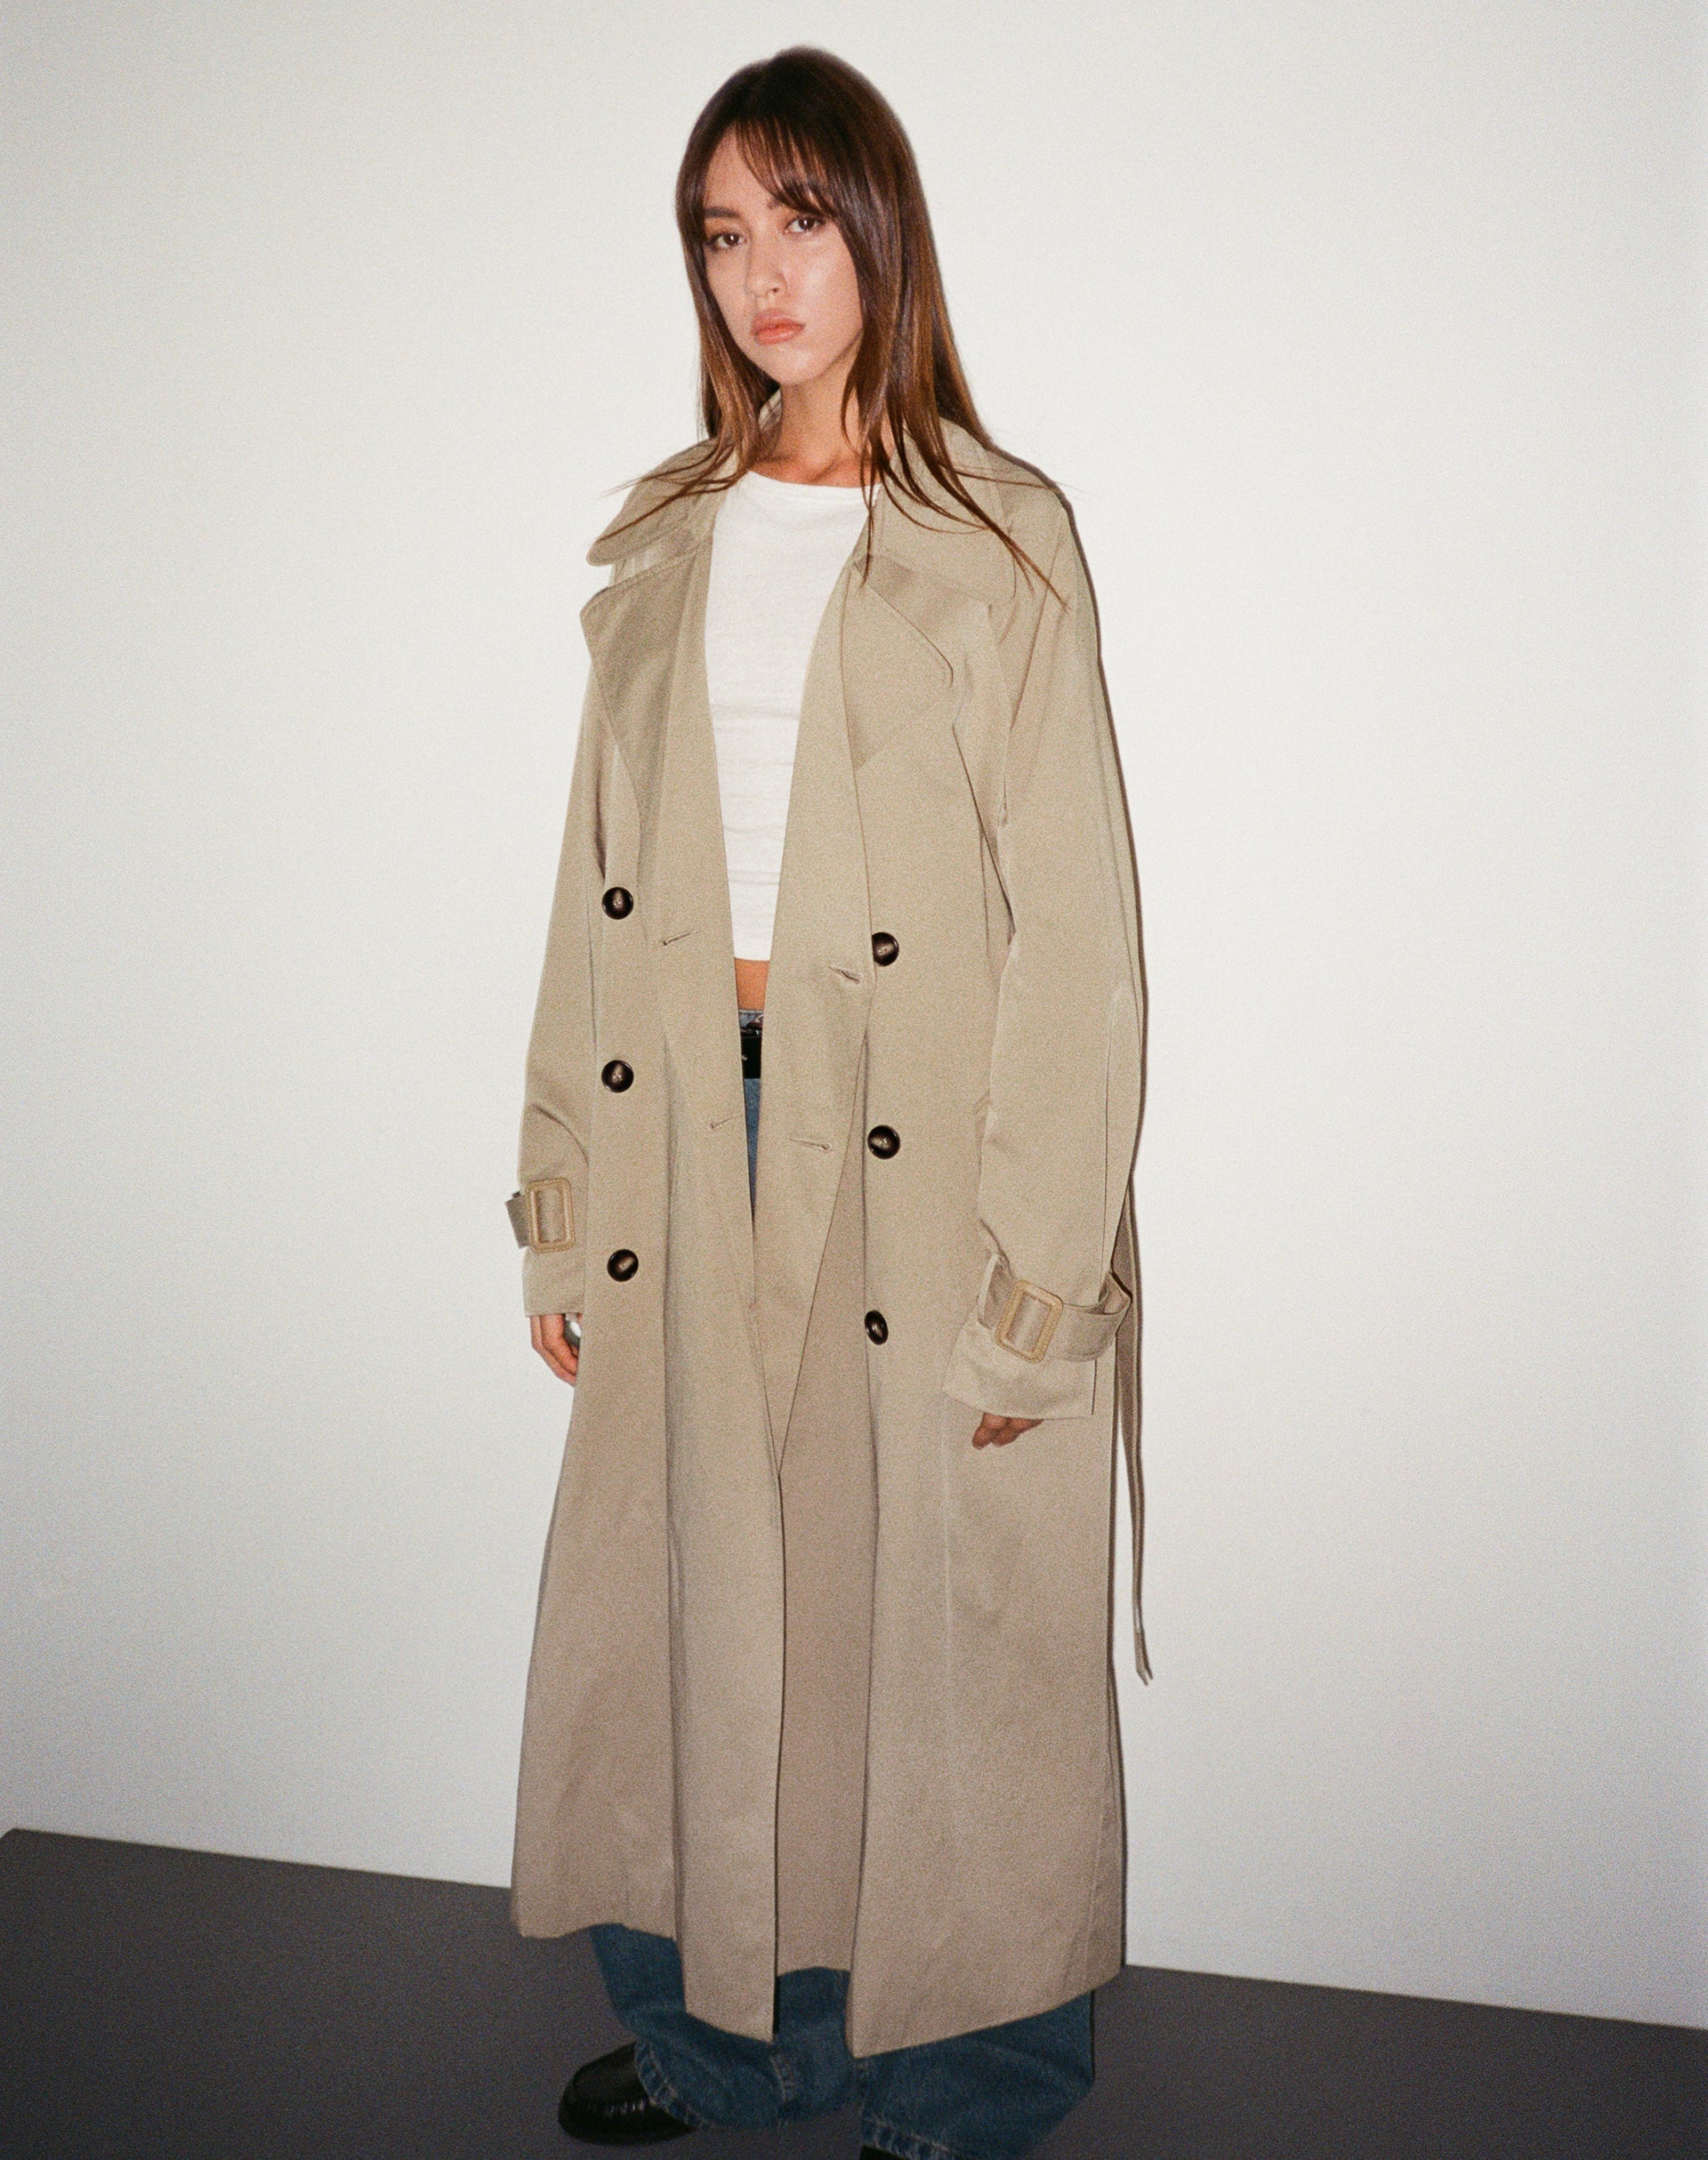 Image of Orcati Double Breasted Trench Coat in Tan